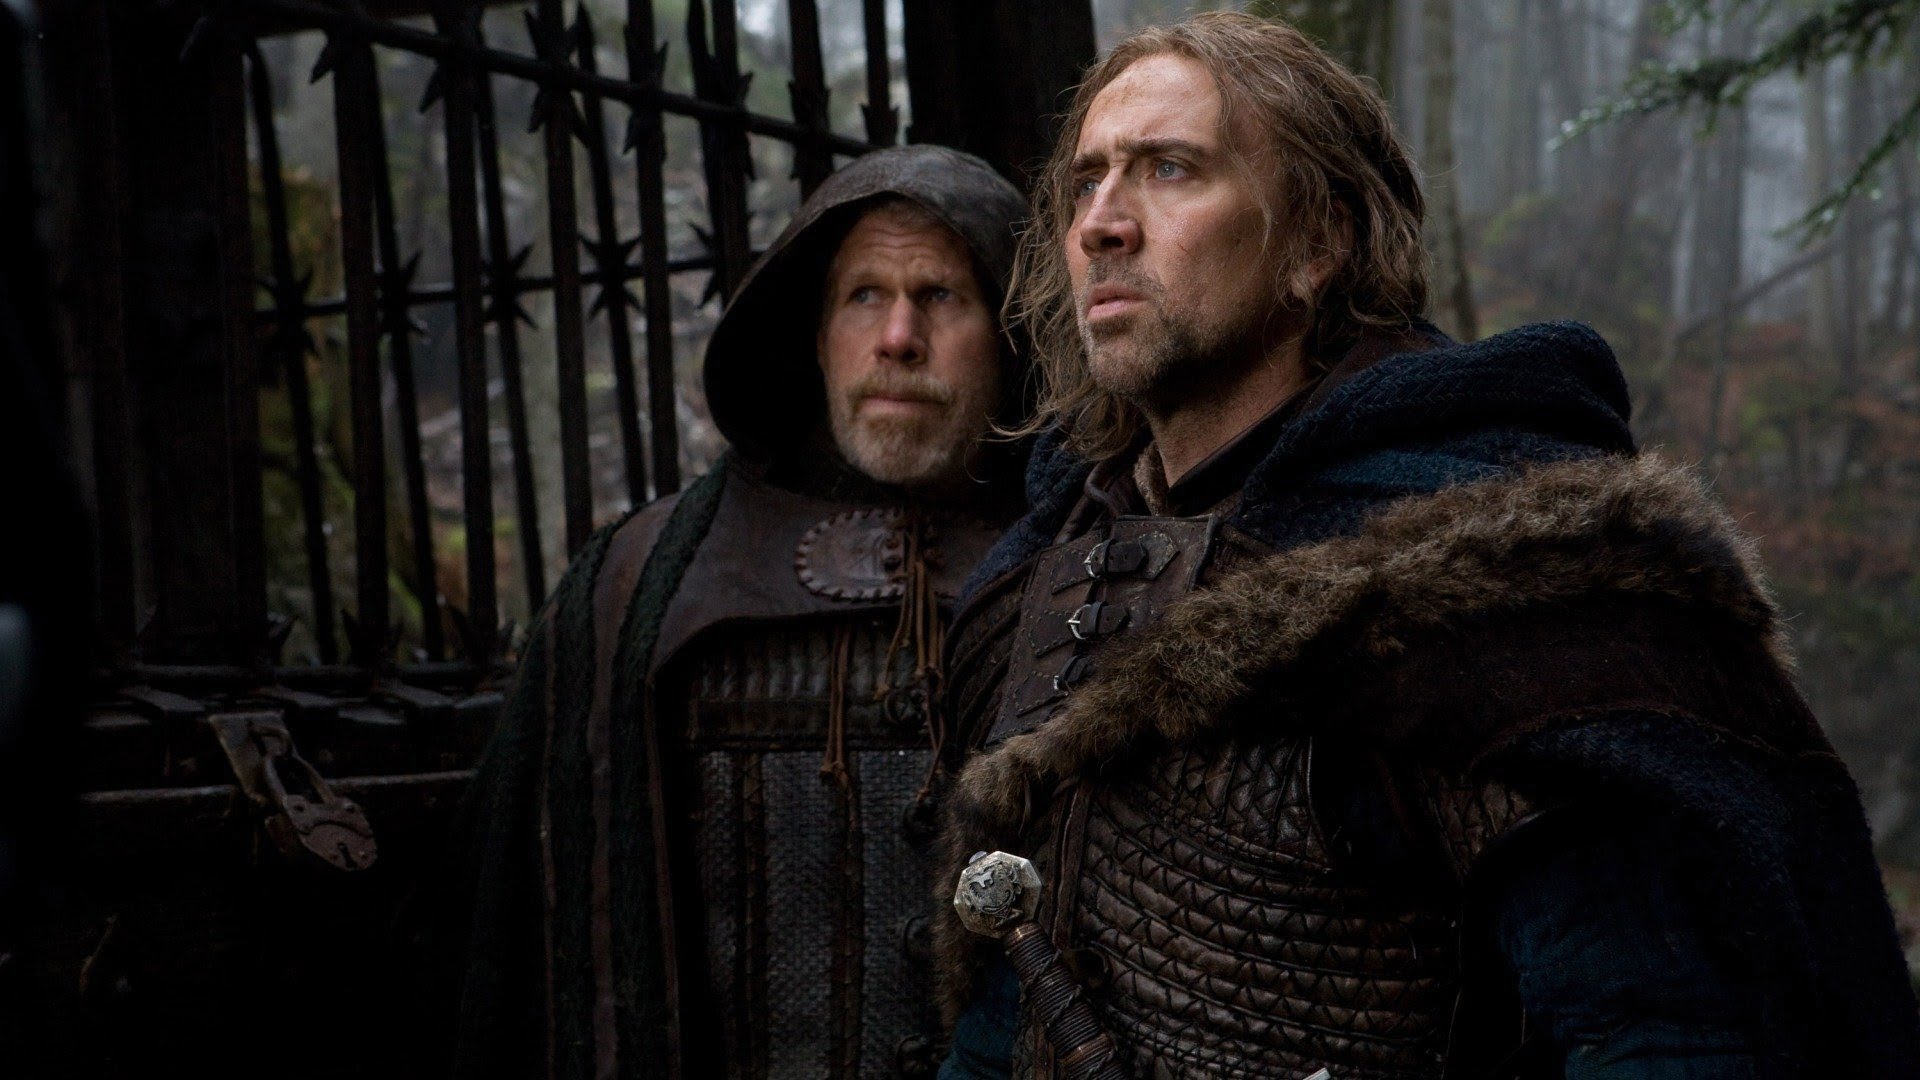 (L-R) Ron Perlman as Felson and Nicolas Cage as Behman in "Season of the Witch."